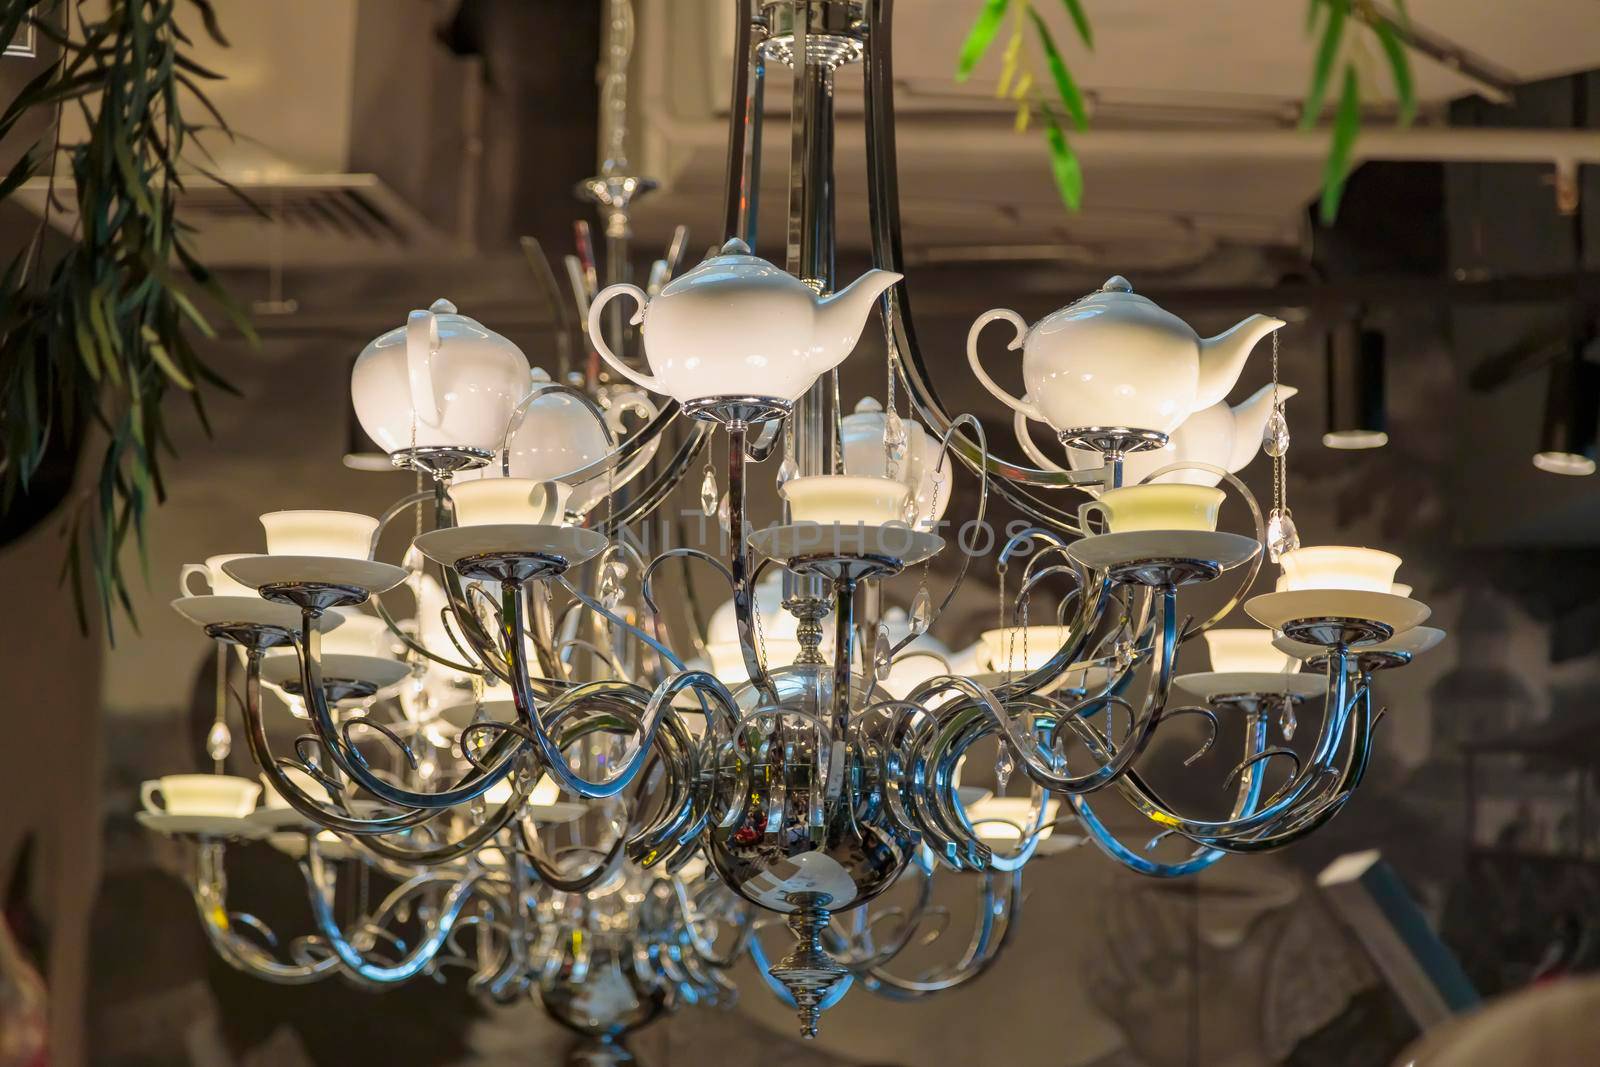 Luxurious large chandelier, lamps in the form of porcelain teapots and cups and saucers. Iron base.